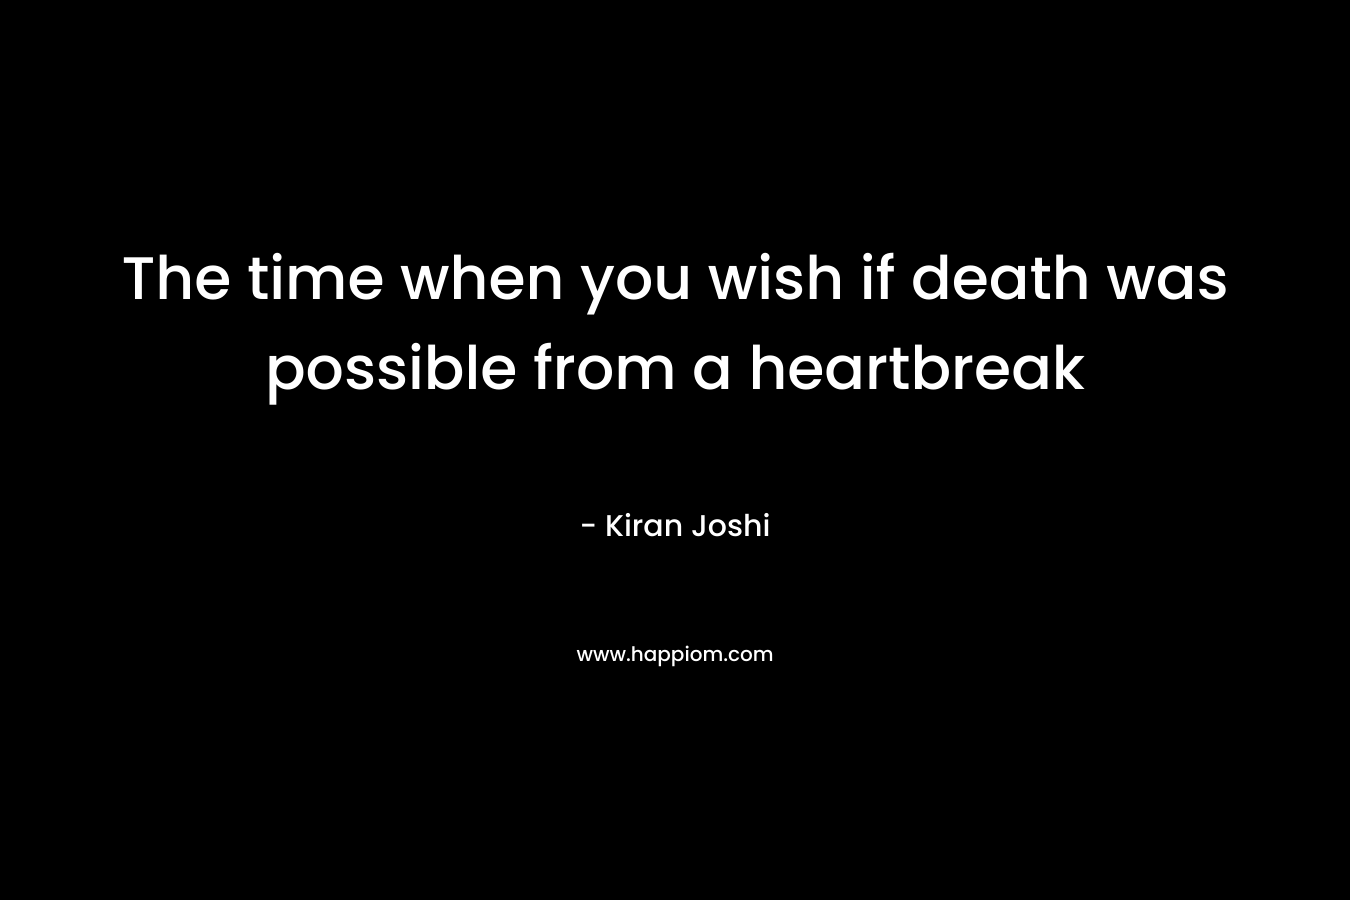 The time when you wish if death was possible from a heartbreak